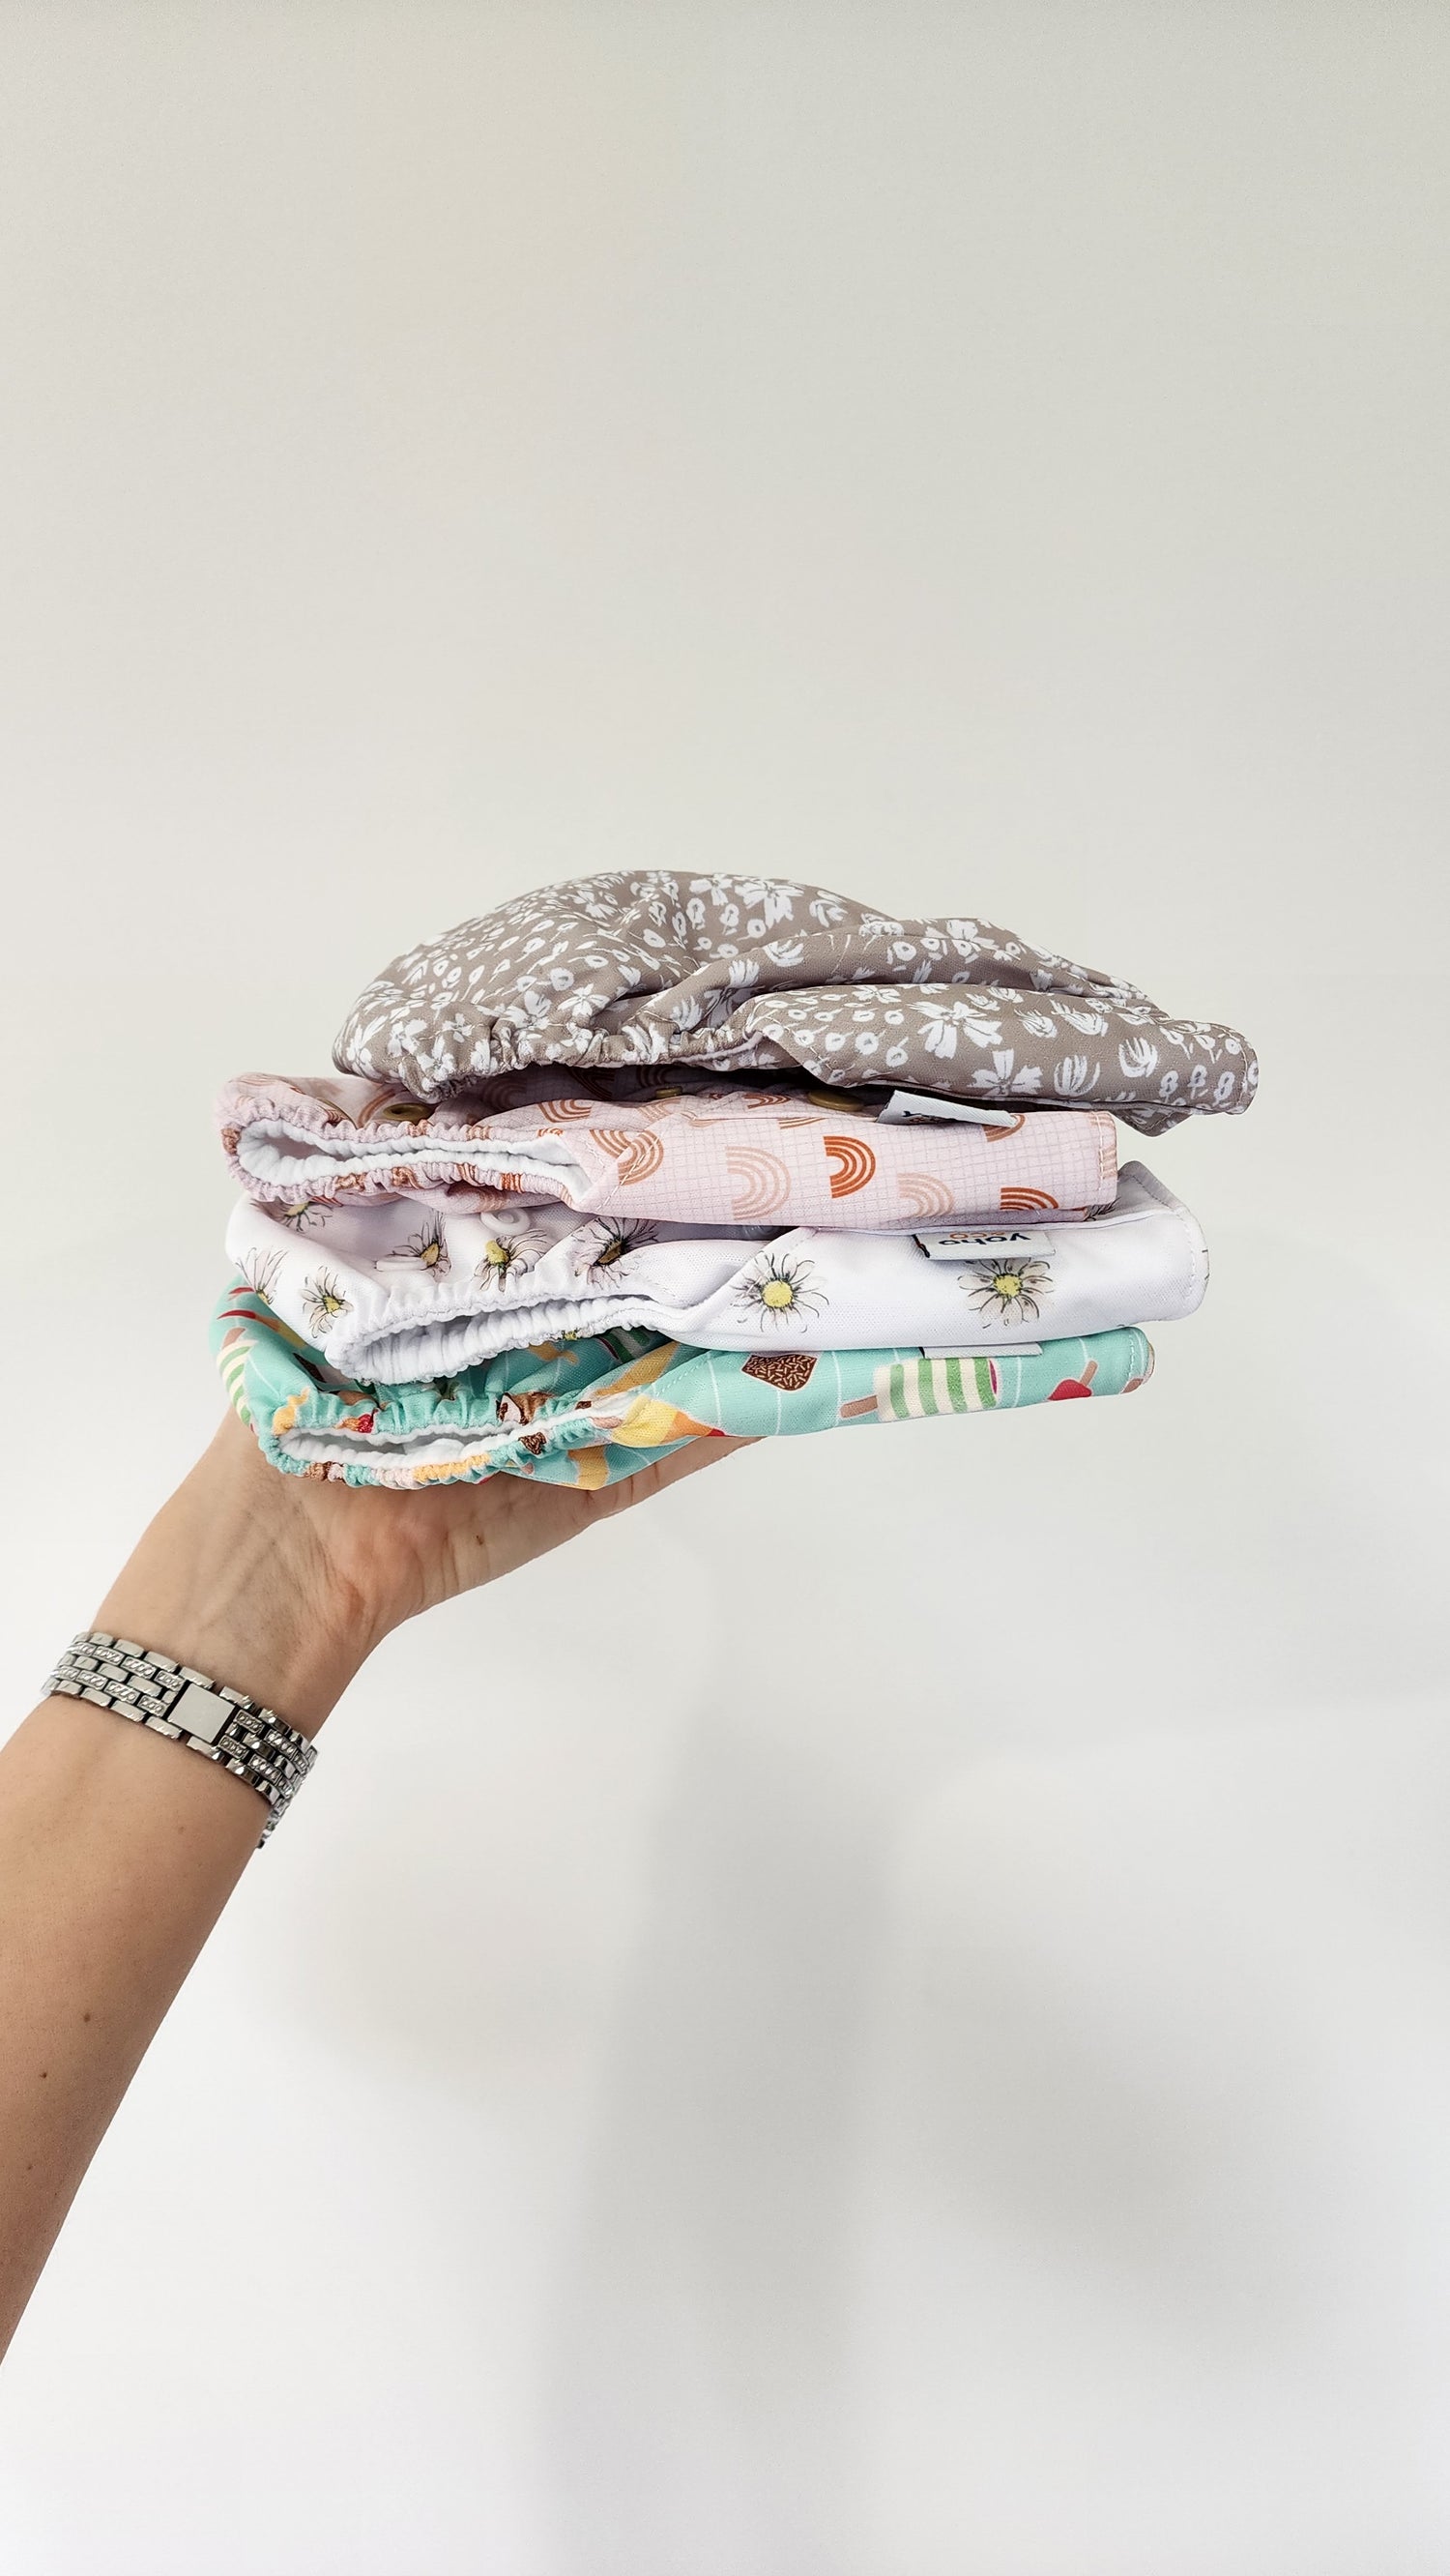 All types of Reusable Nappies & Inserts